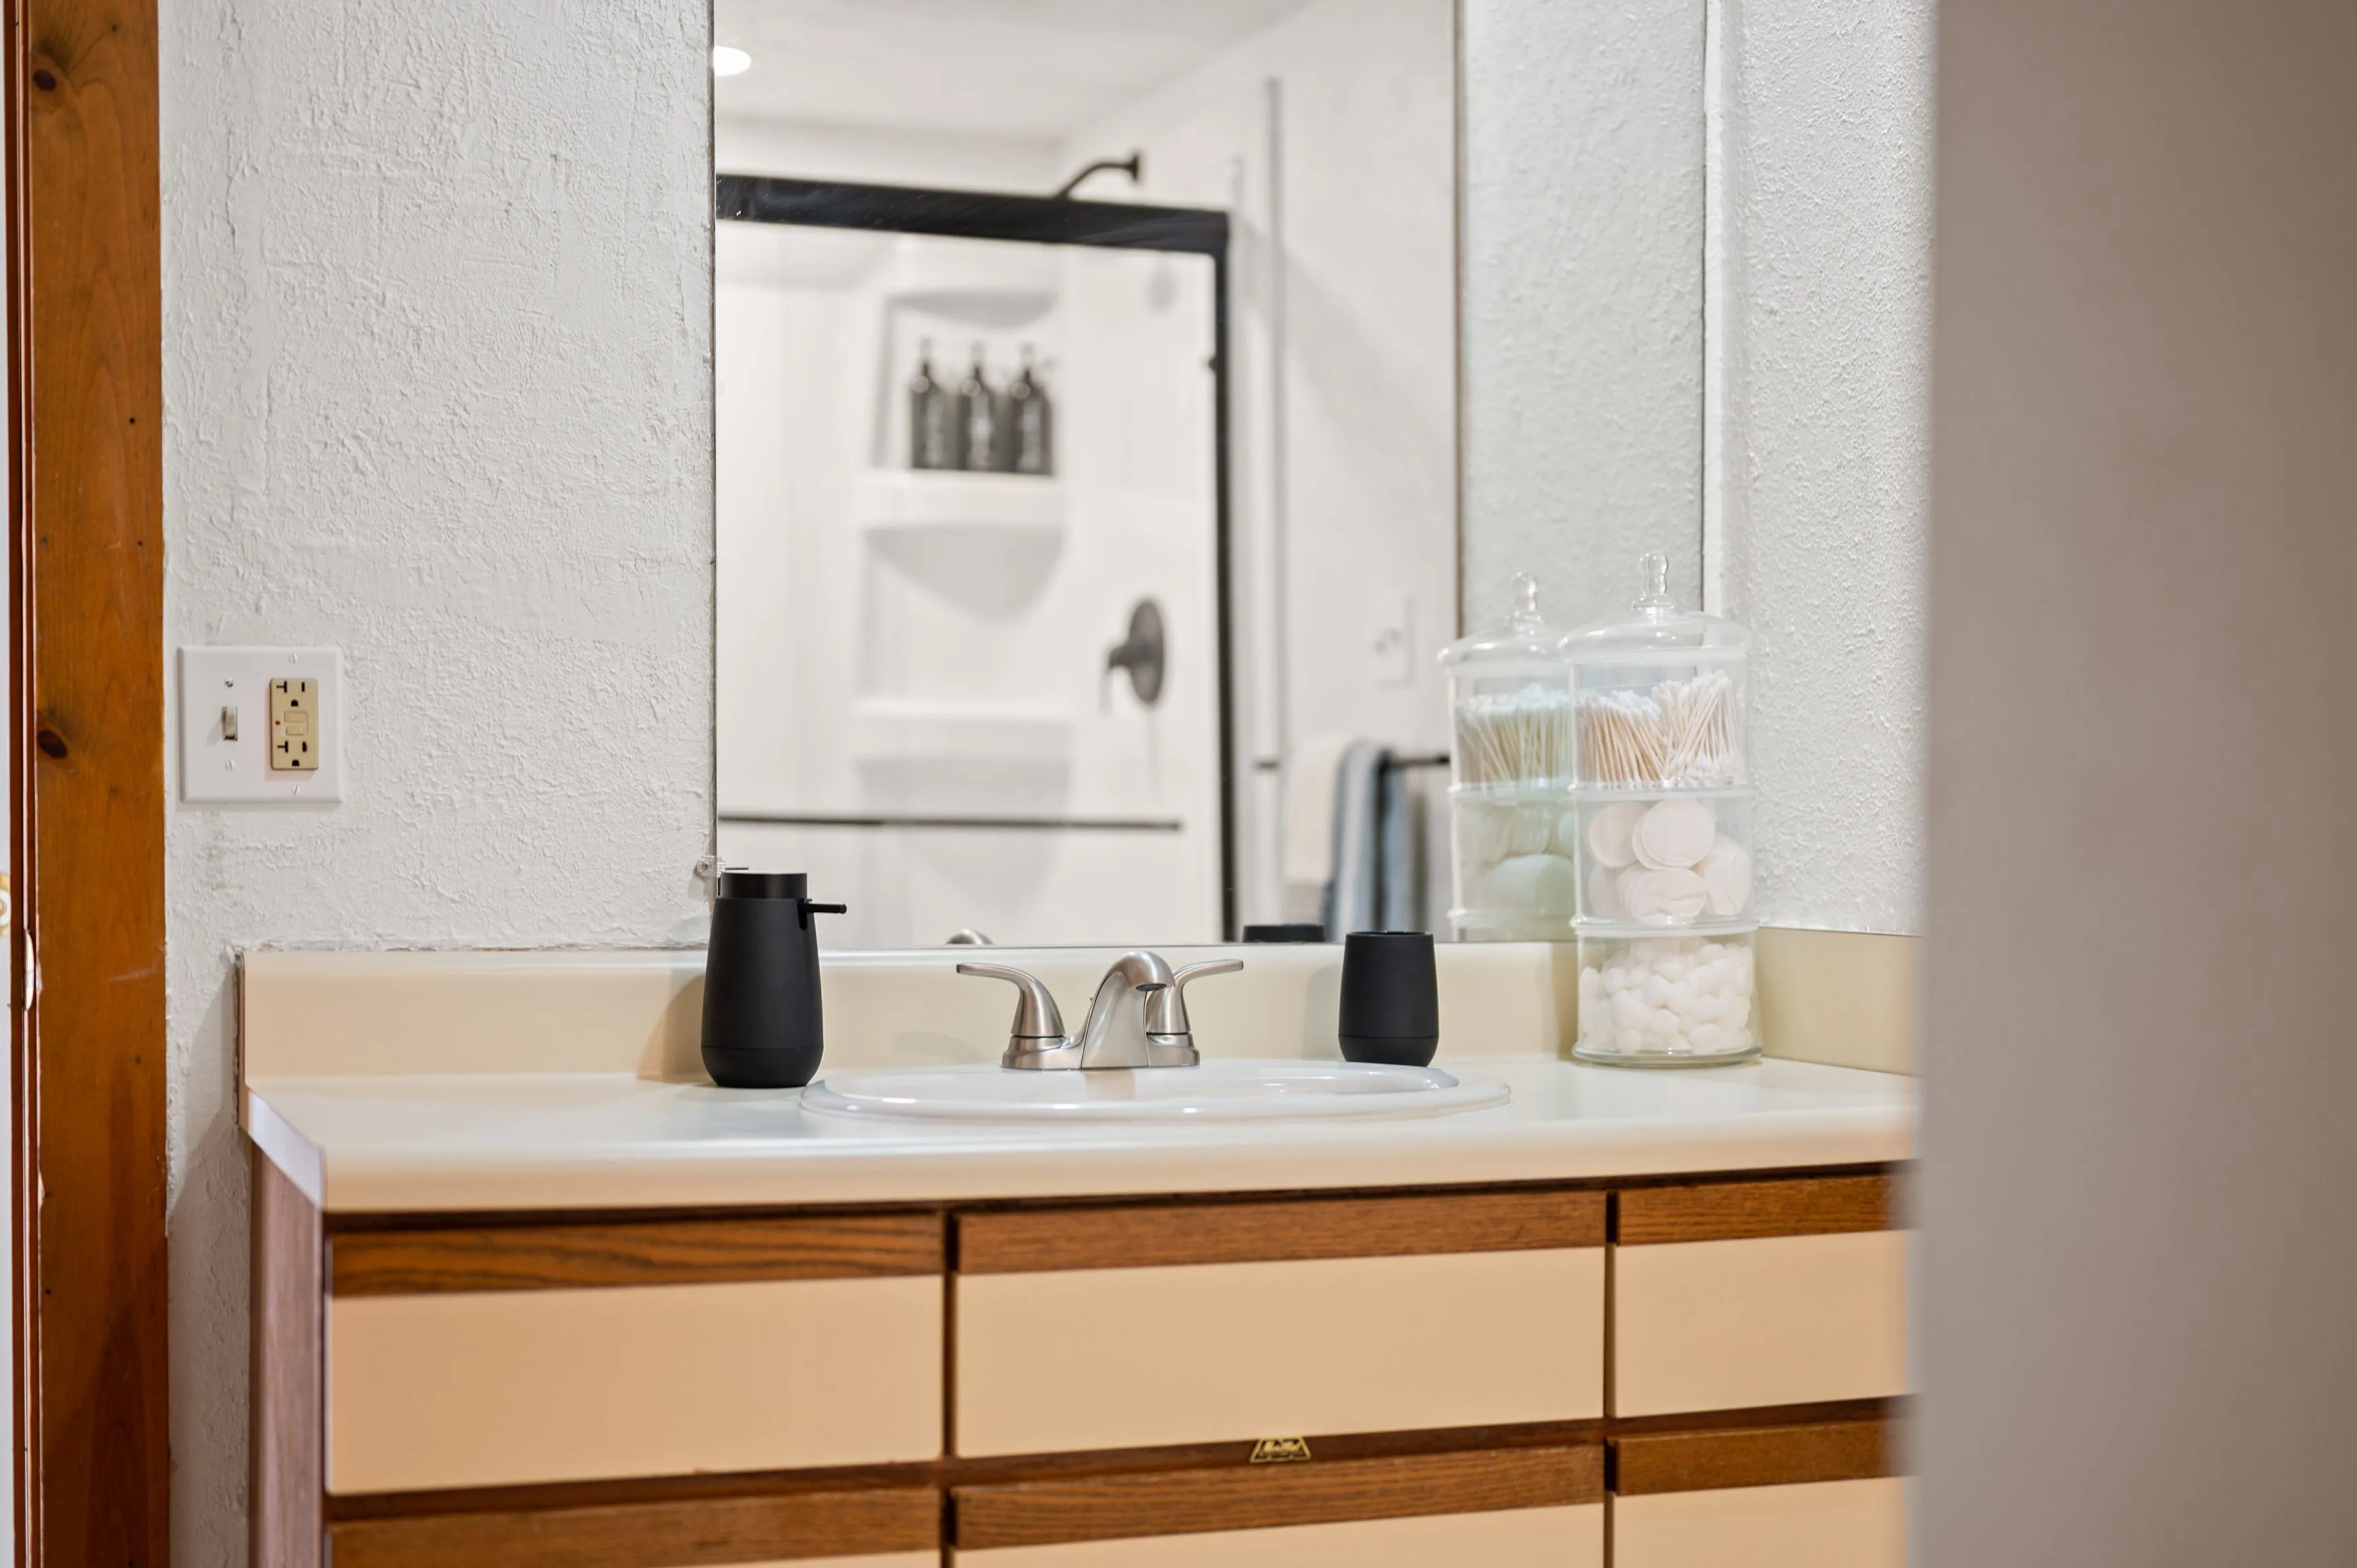 Modern bathroom vanity with a white countertop, wooden cabinets, and a mirror reflecting a glass-door shower; assorted toiletry containers arranged on the countertop.